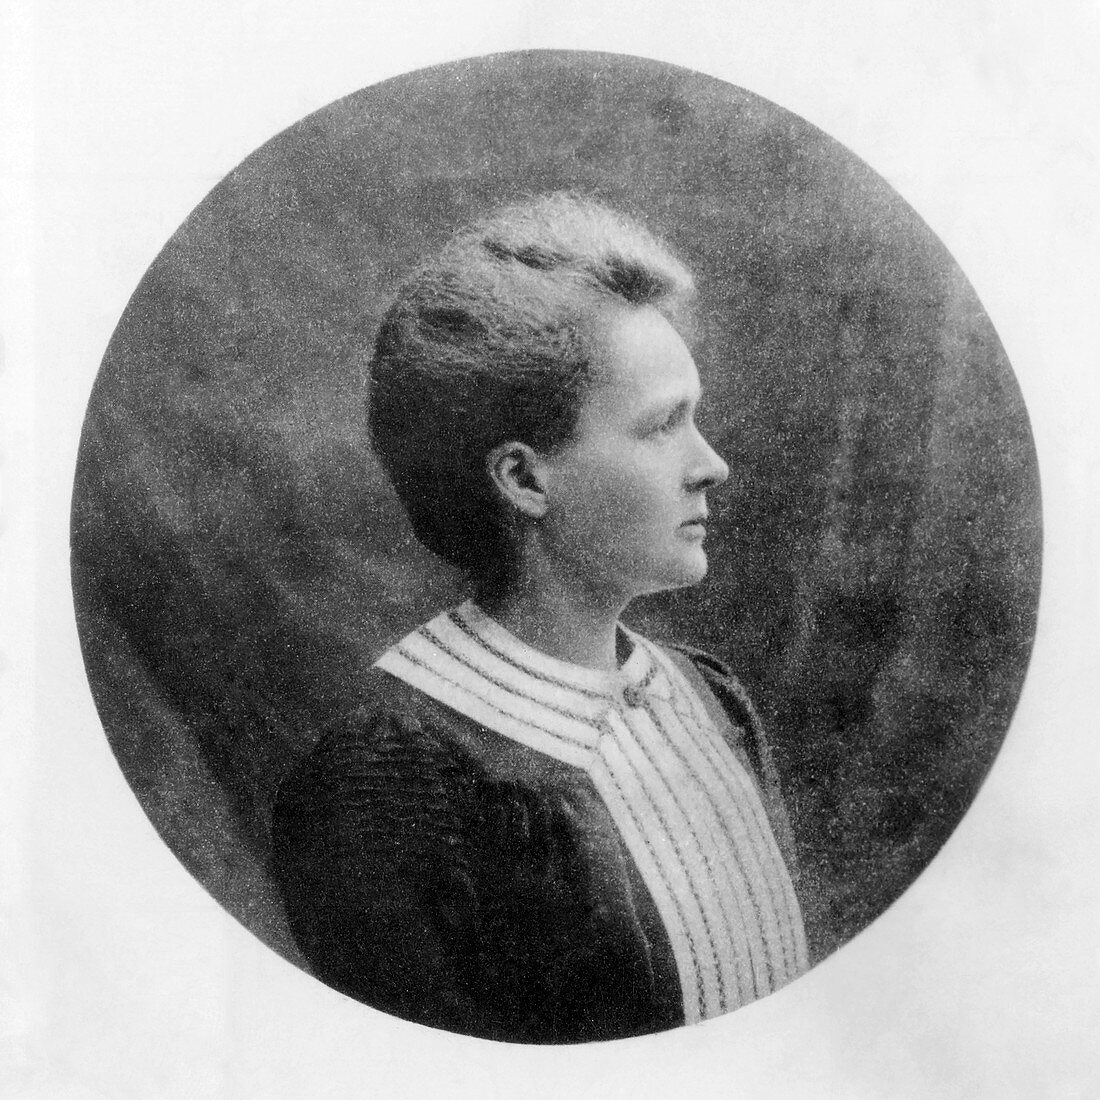 Marie Curie, Polish-French chemist